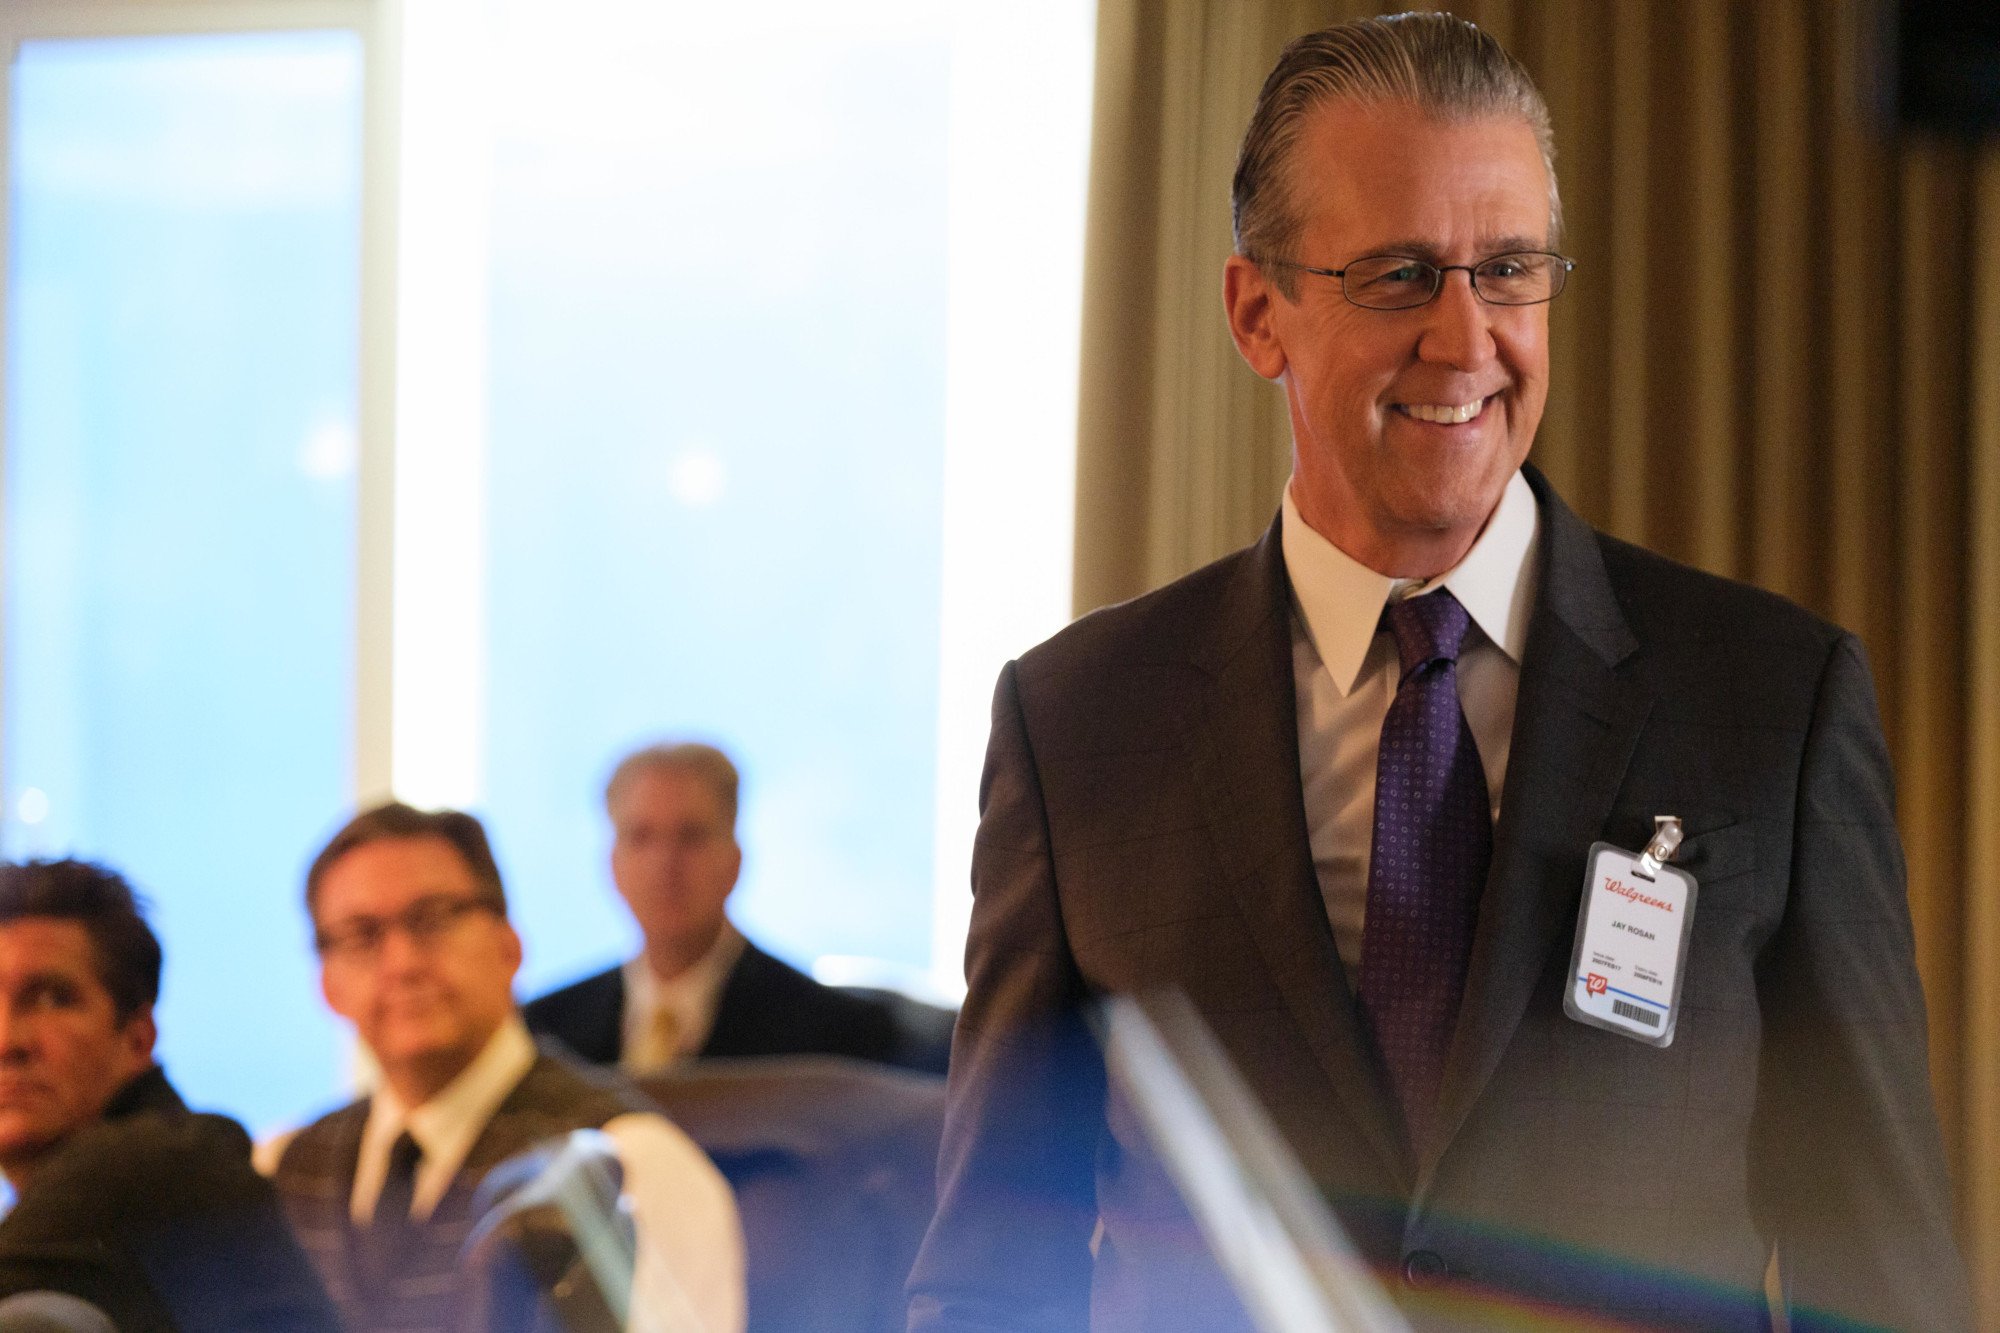 Alan Ruck as Dr. Jay Rosan in 'The Dropout' Episode 4. He's standing in a meeting room and wearing a suit.